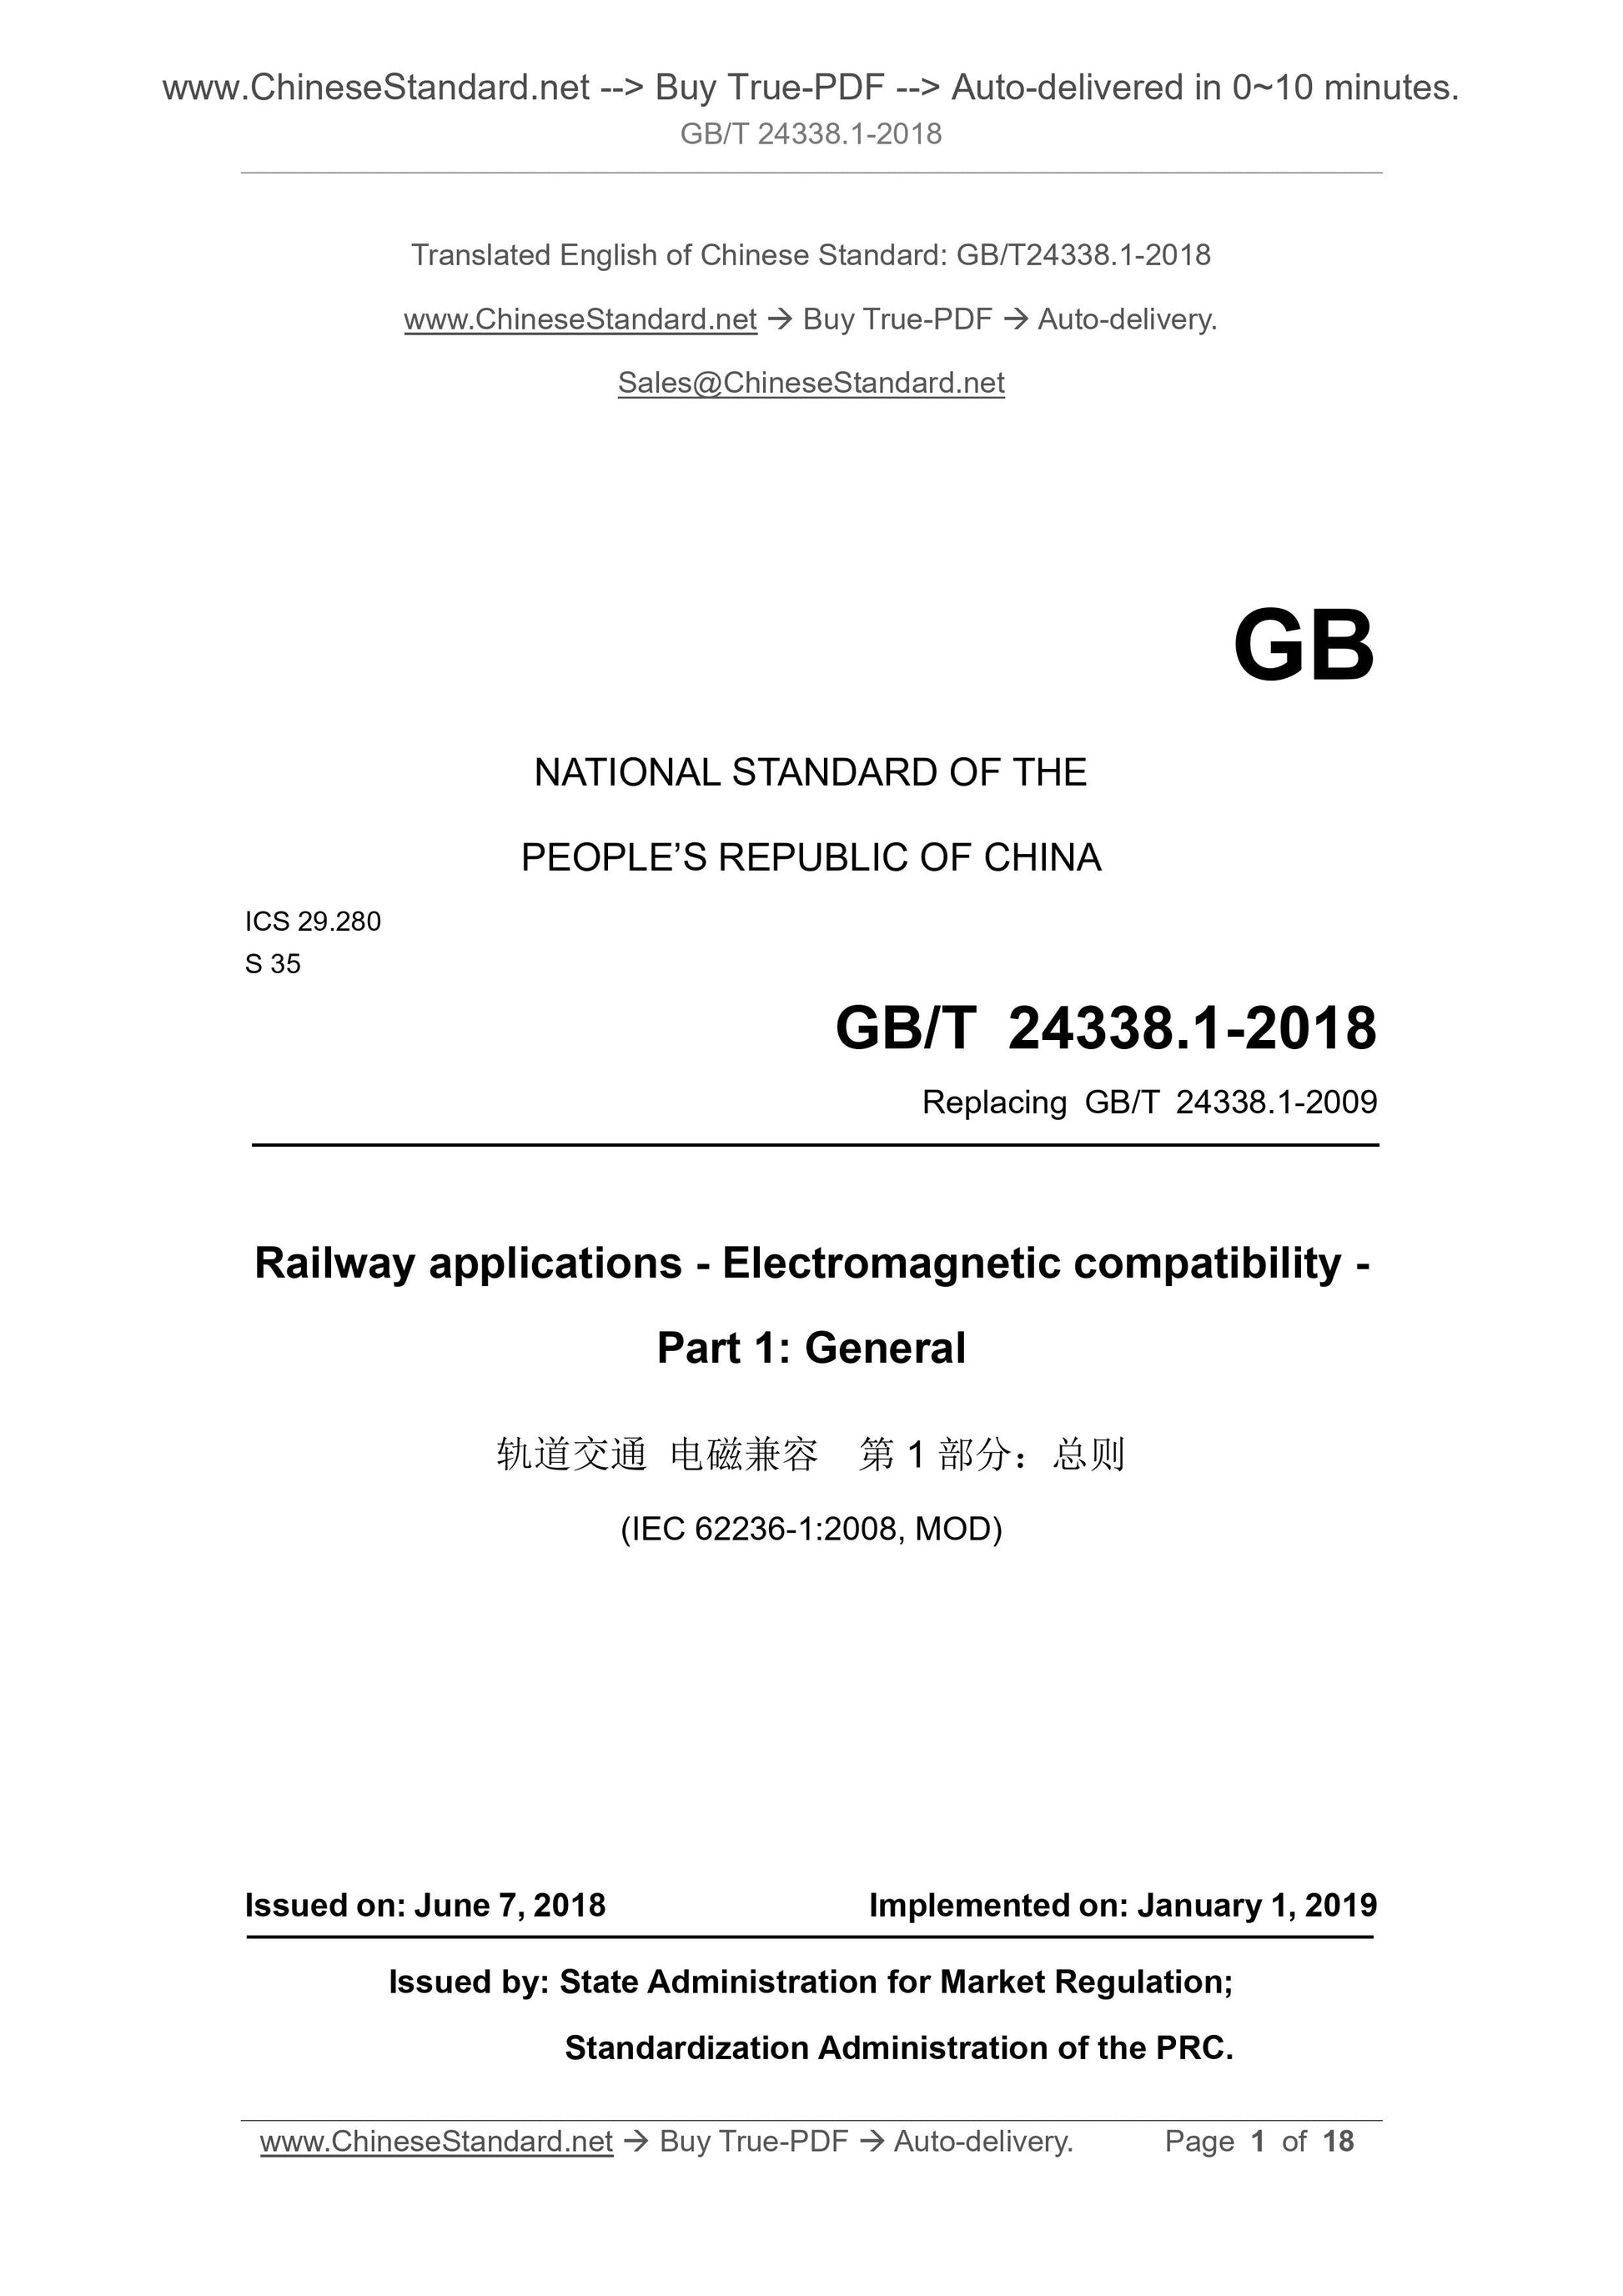 GB/T 24338.1-2018 Page 1